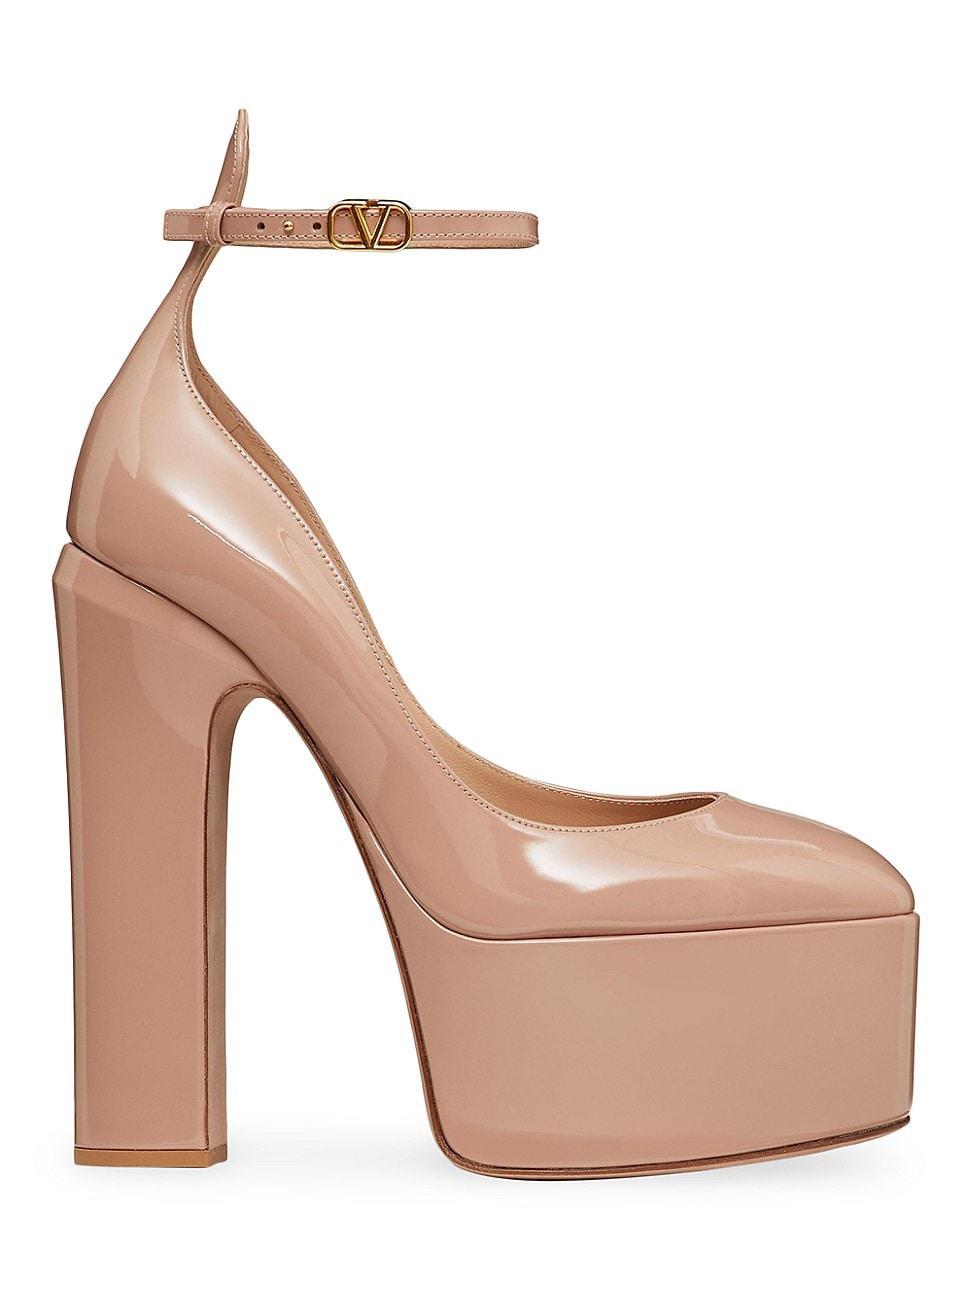 Womens Tan-go Platform Pumps In Patent Leather Product Image